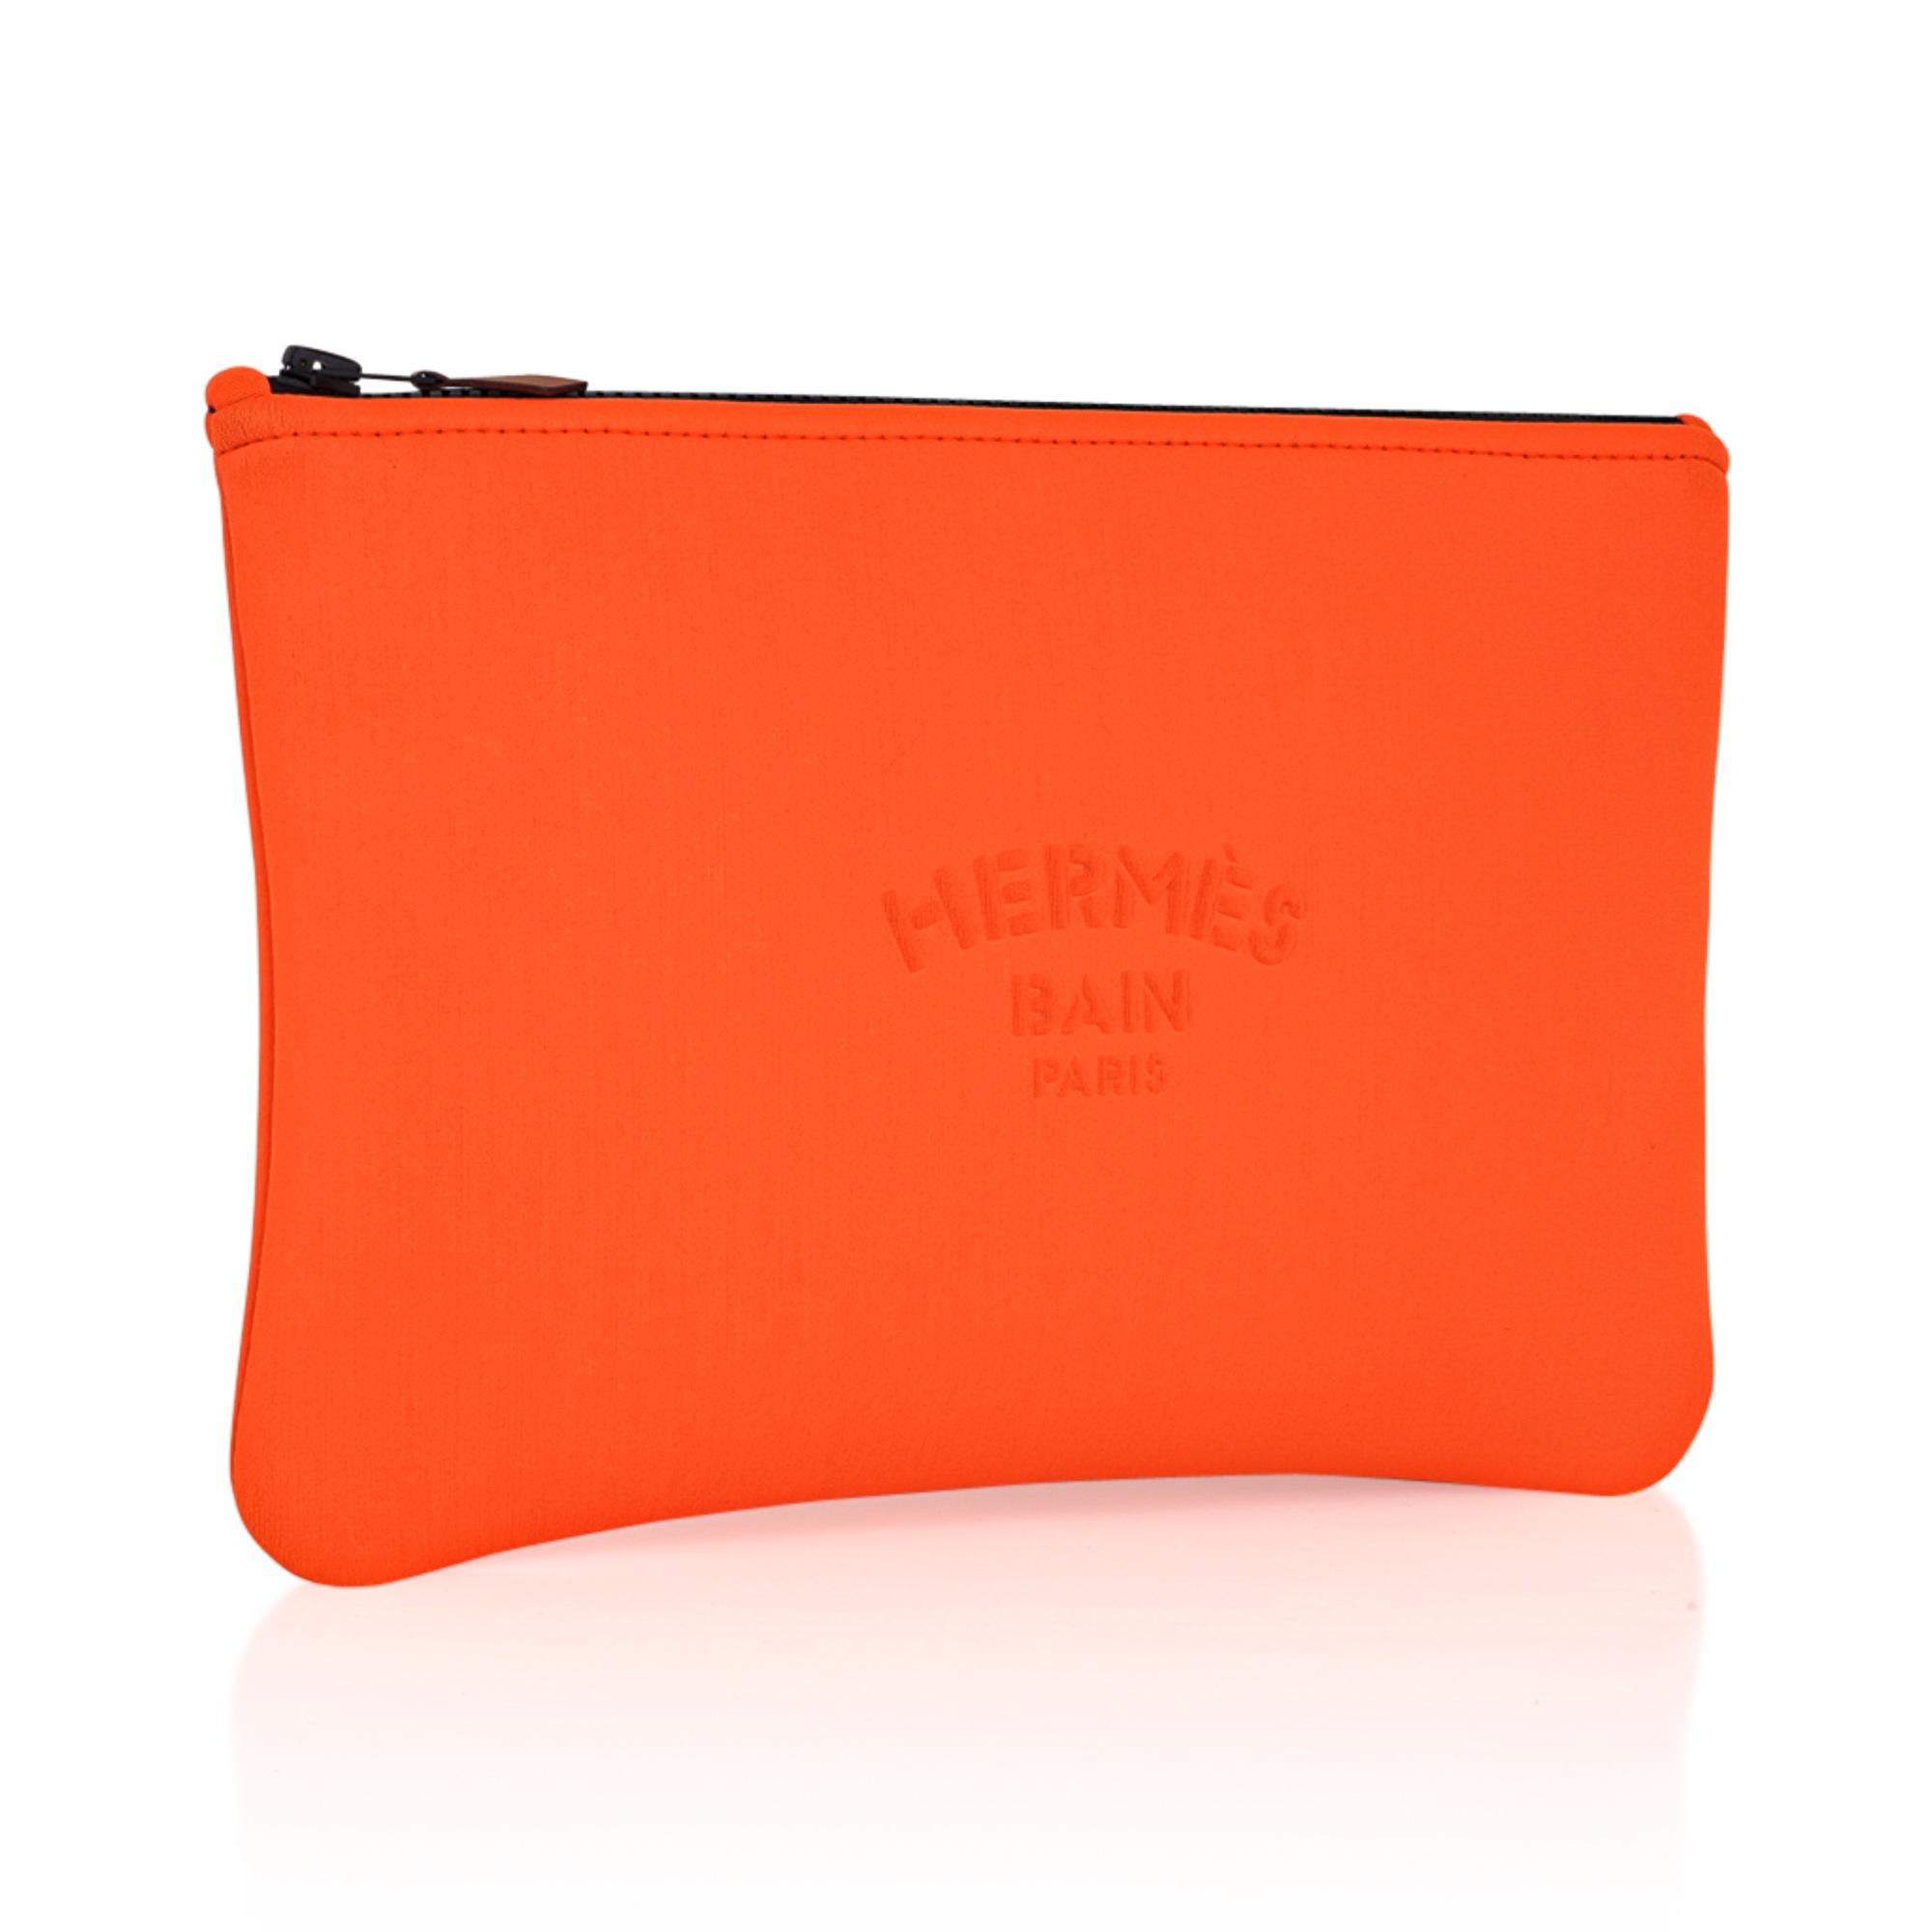 Mightychic offers an Hermes Neobain case featured in the small model.
Fun Neon Orange with Hermes Bain Pairs embossed on front.
Top zipper with leather zipper toggle.
Water repellent Polyamide and elastane makes this flat pouch a wonderful flat